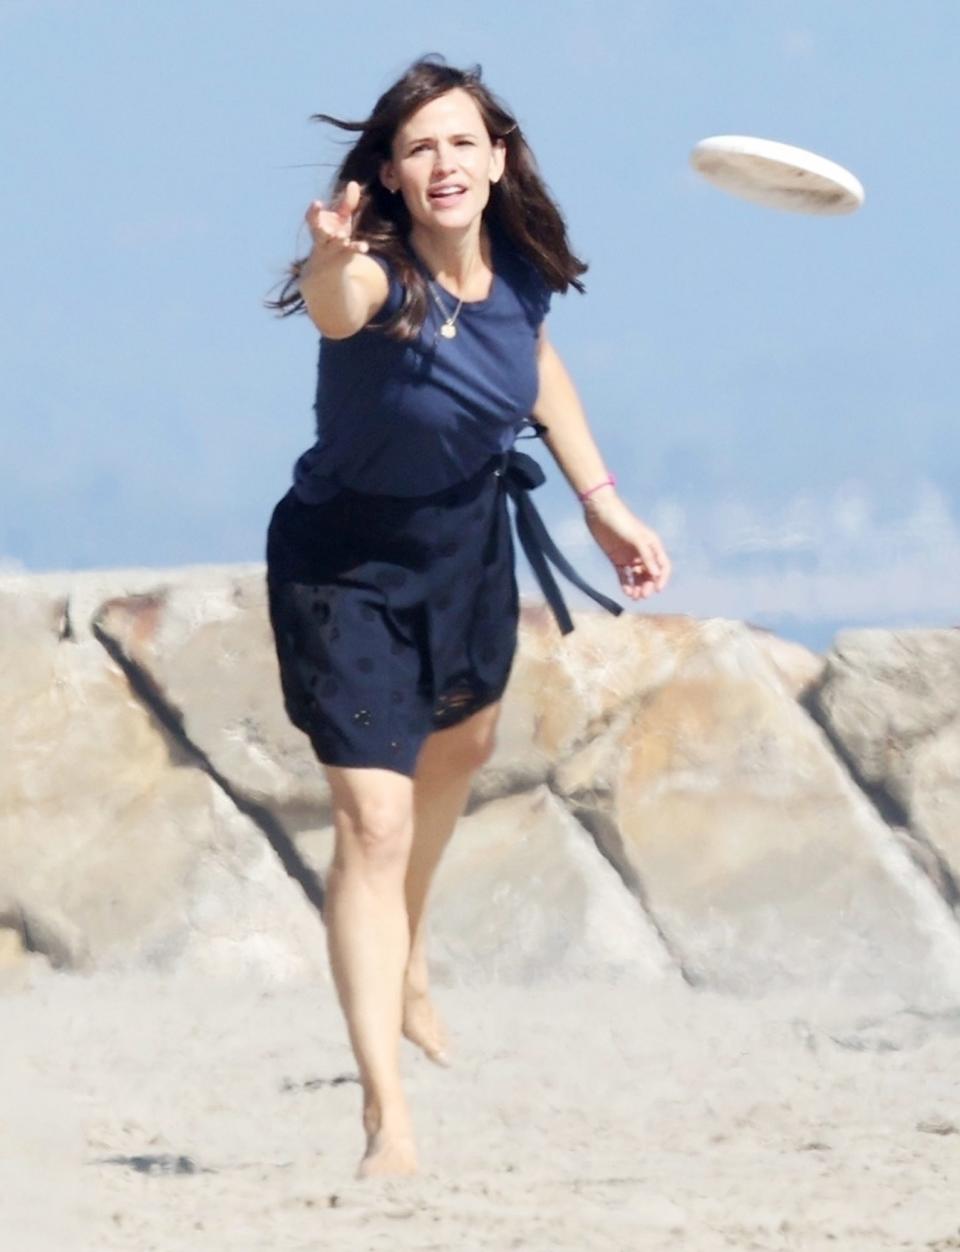 <p>Jennifer Garner plays a round of frisbee with a friend on the beach on Sunday in Santa Barbara.</p>